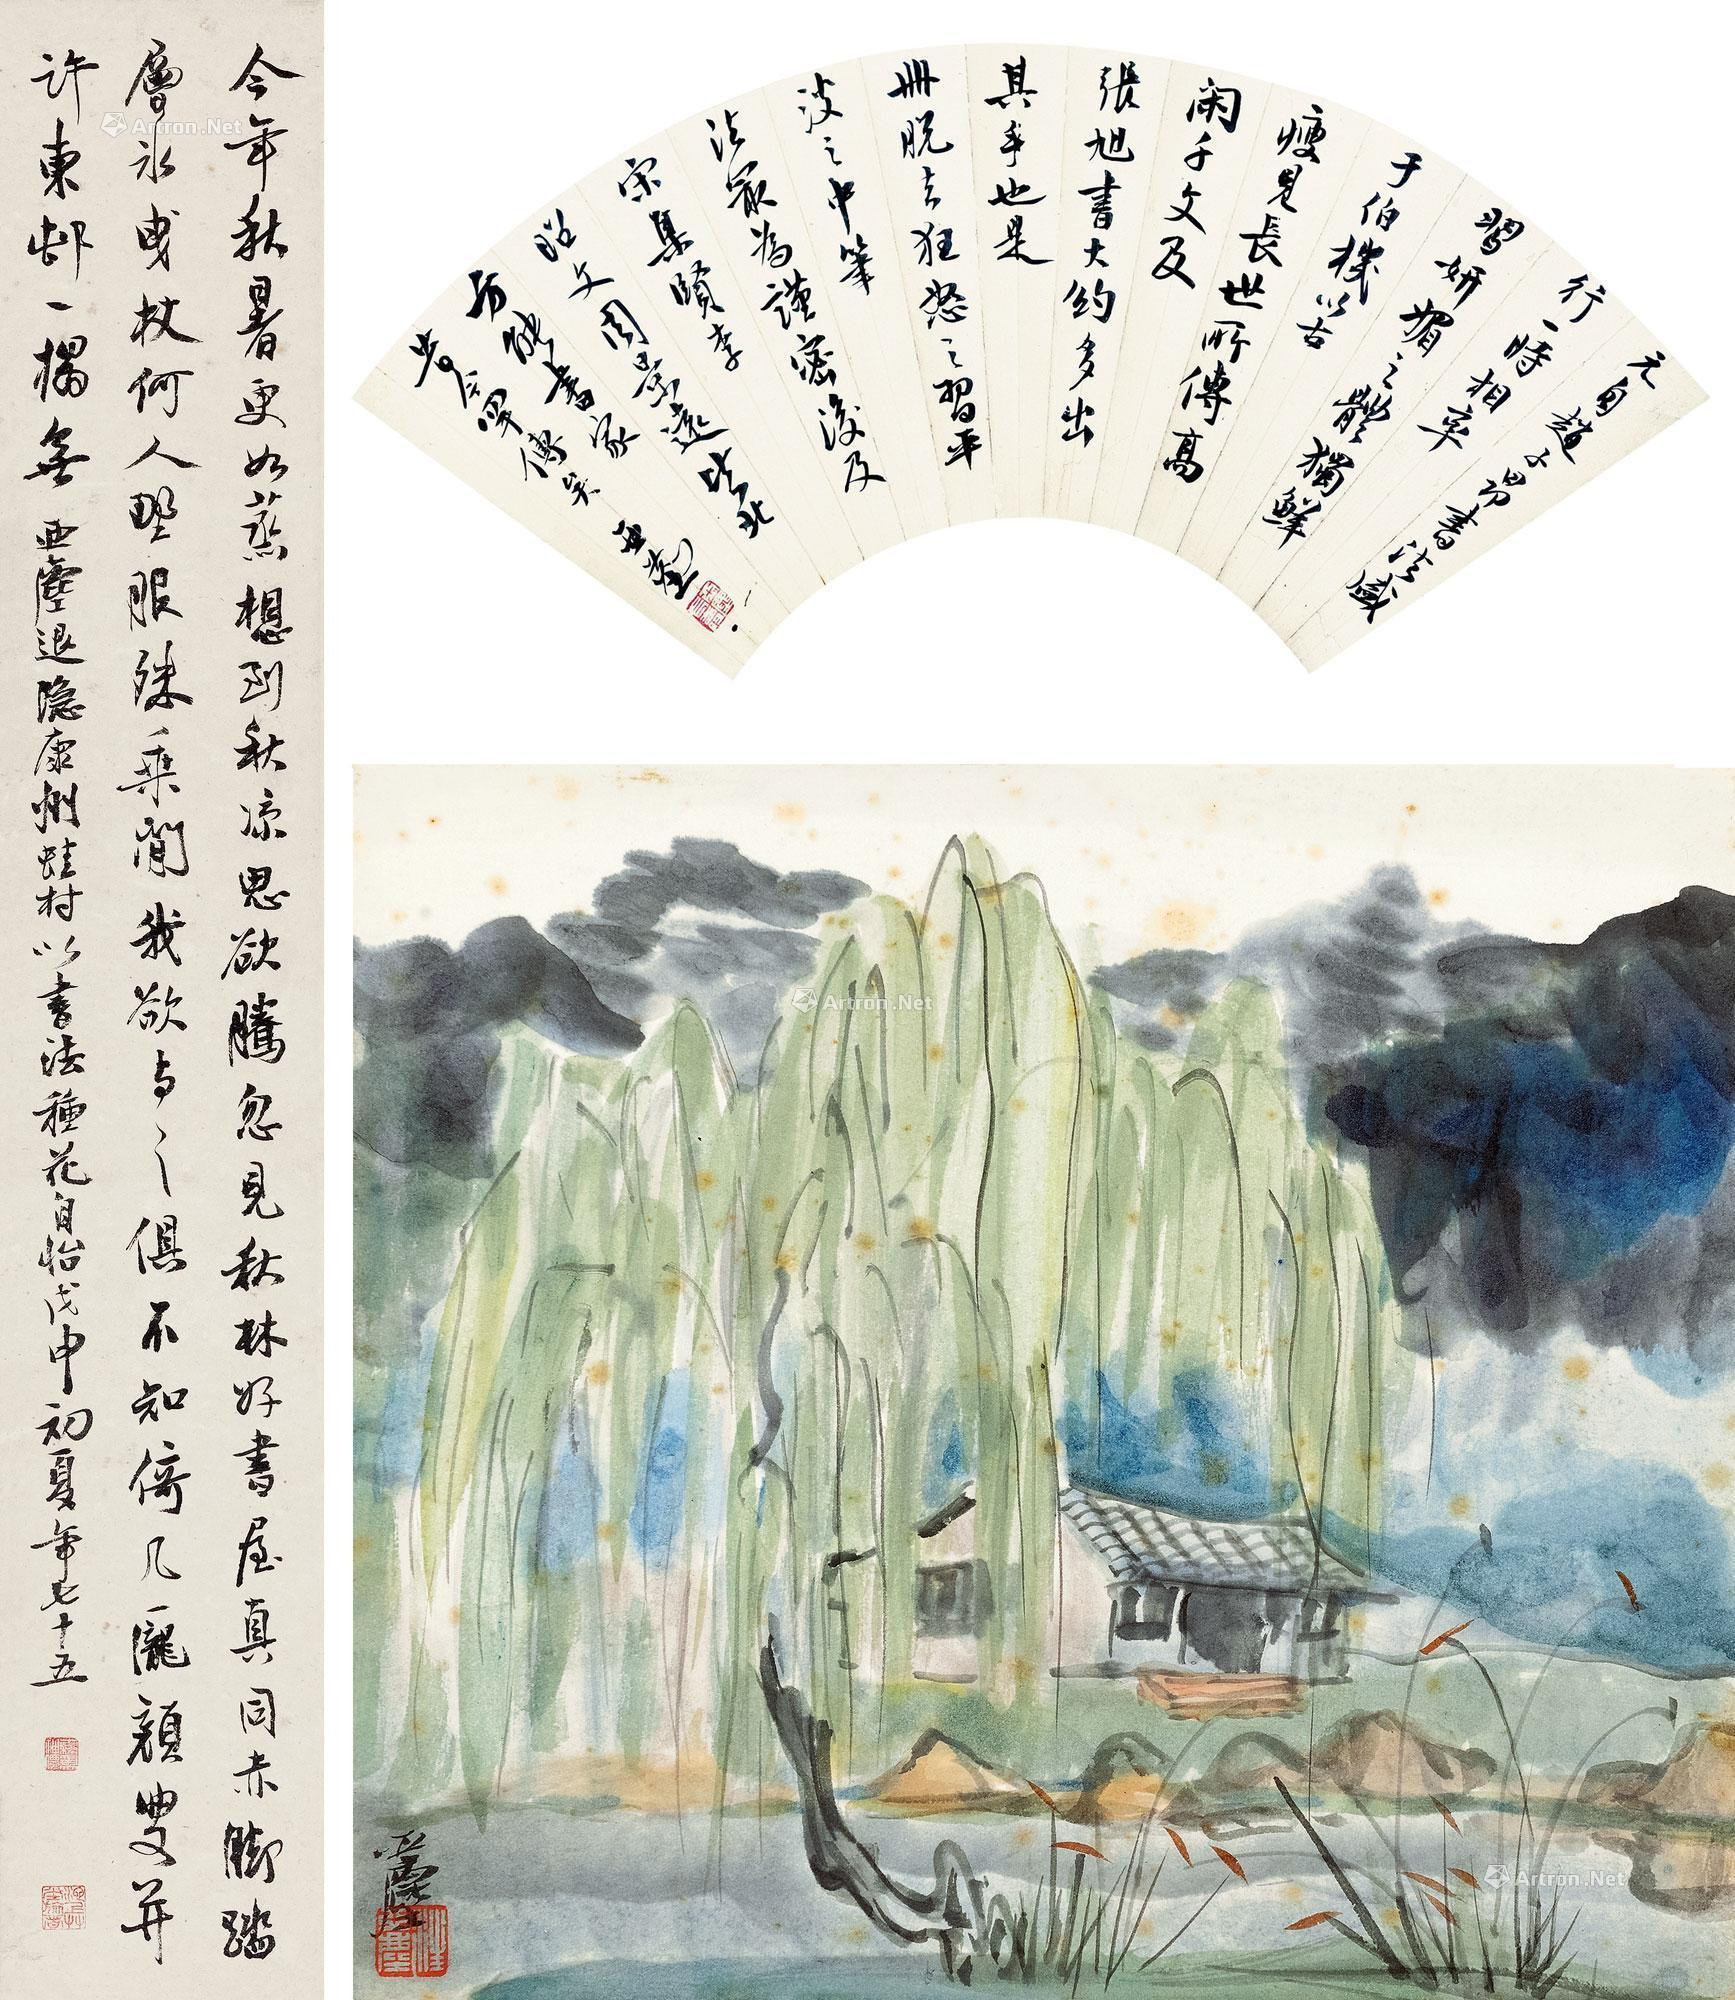 Landscape and Calligraphy